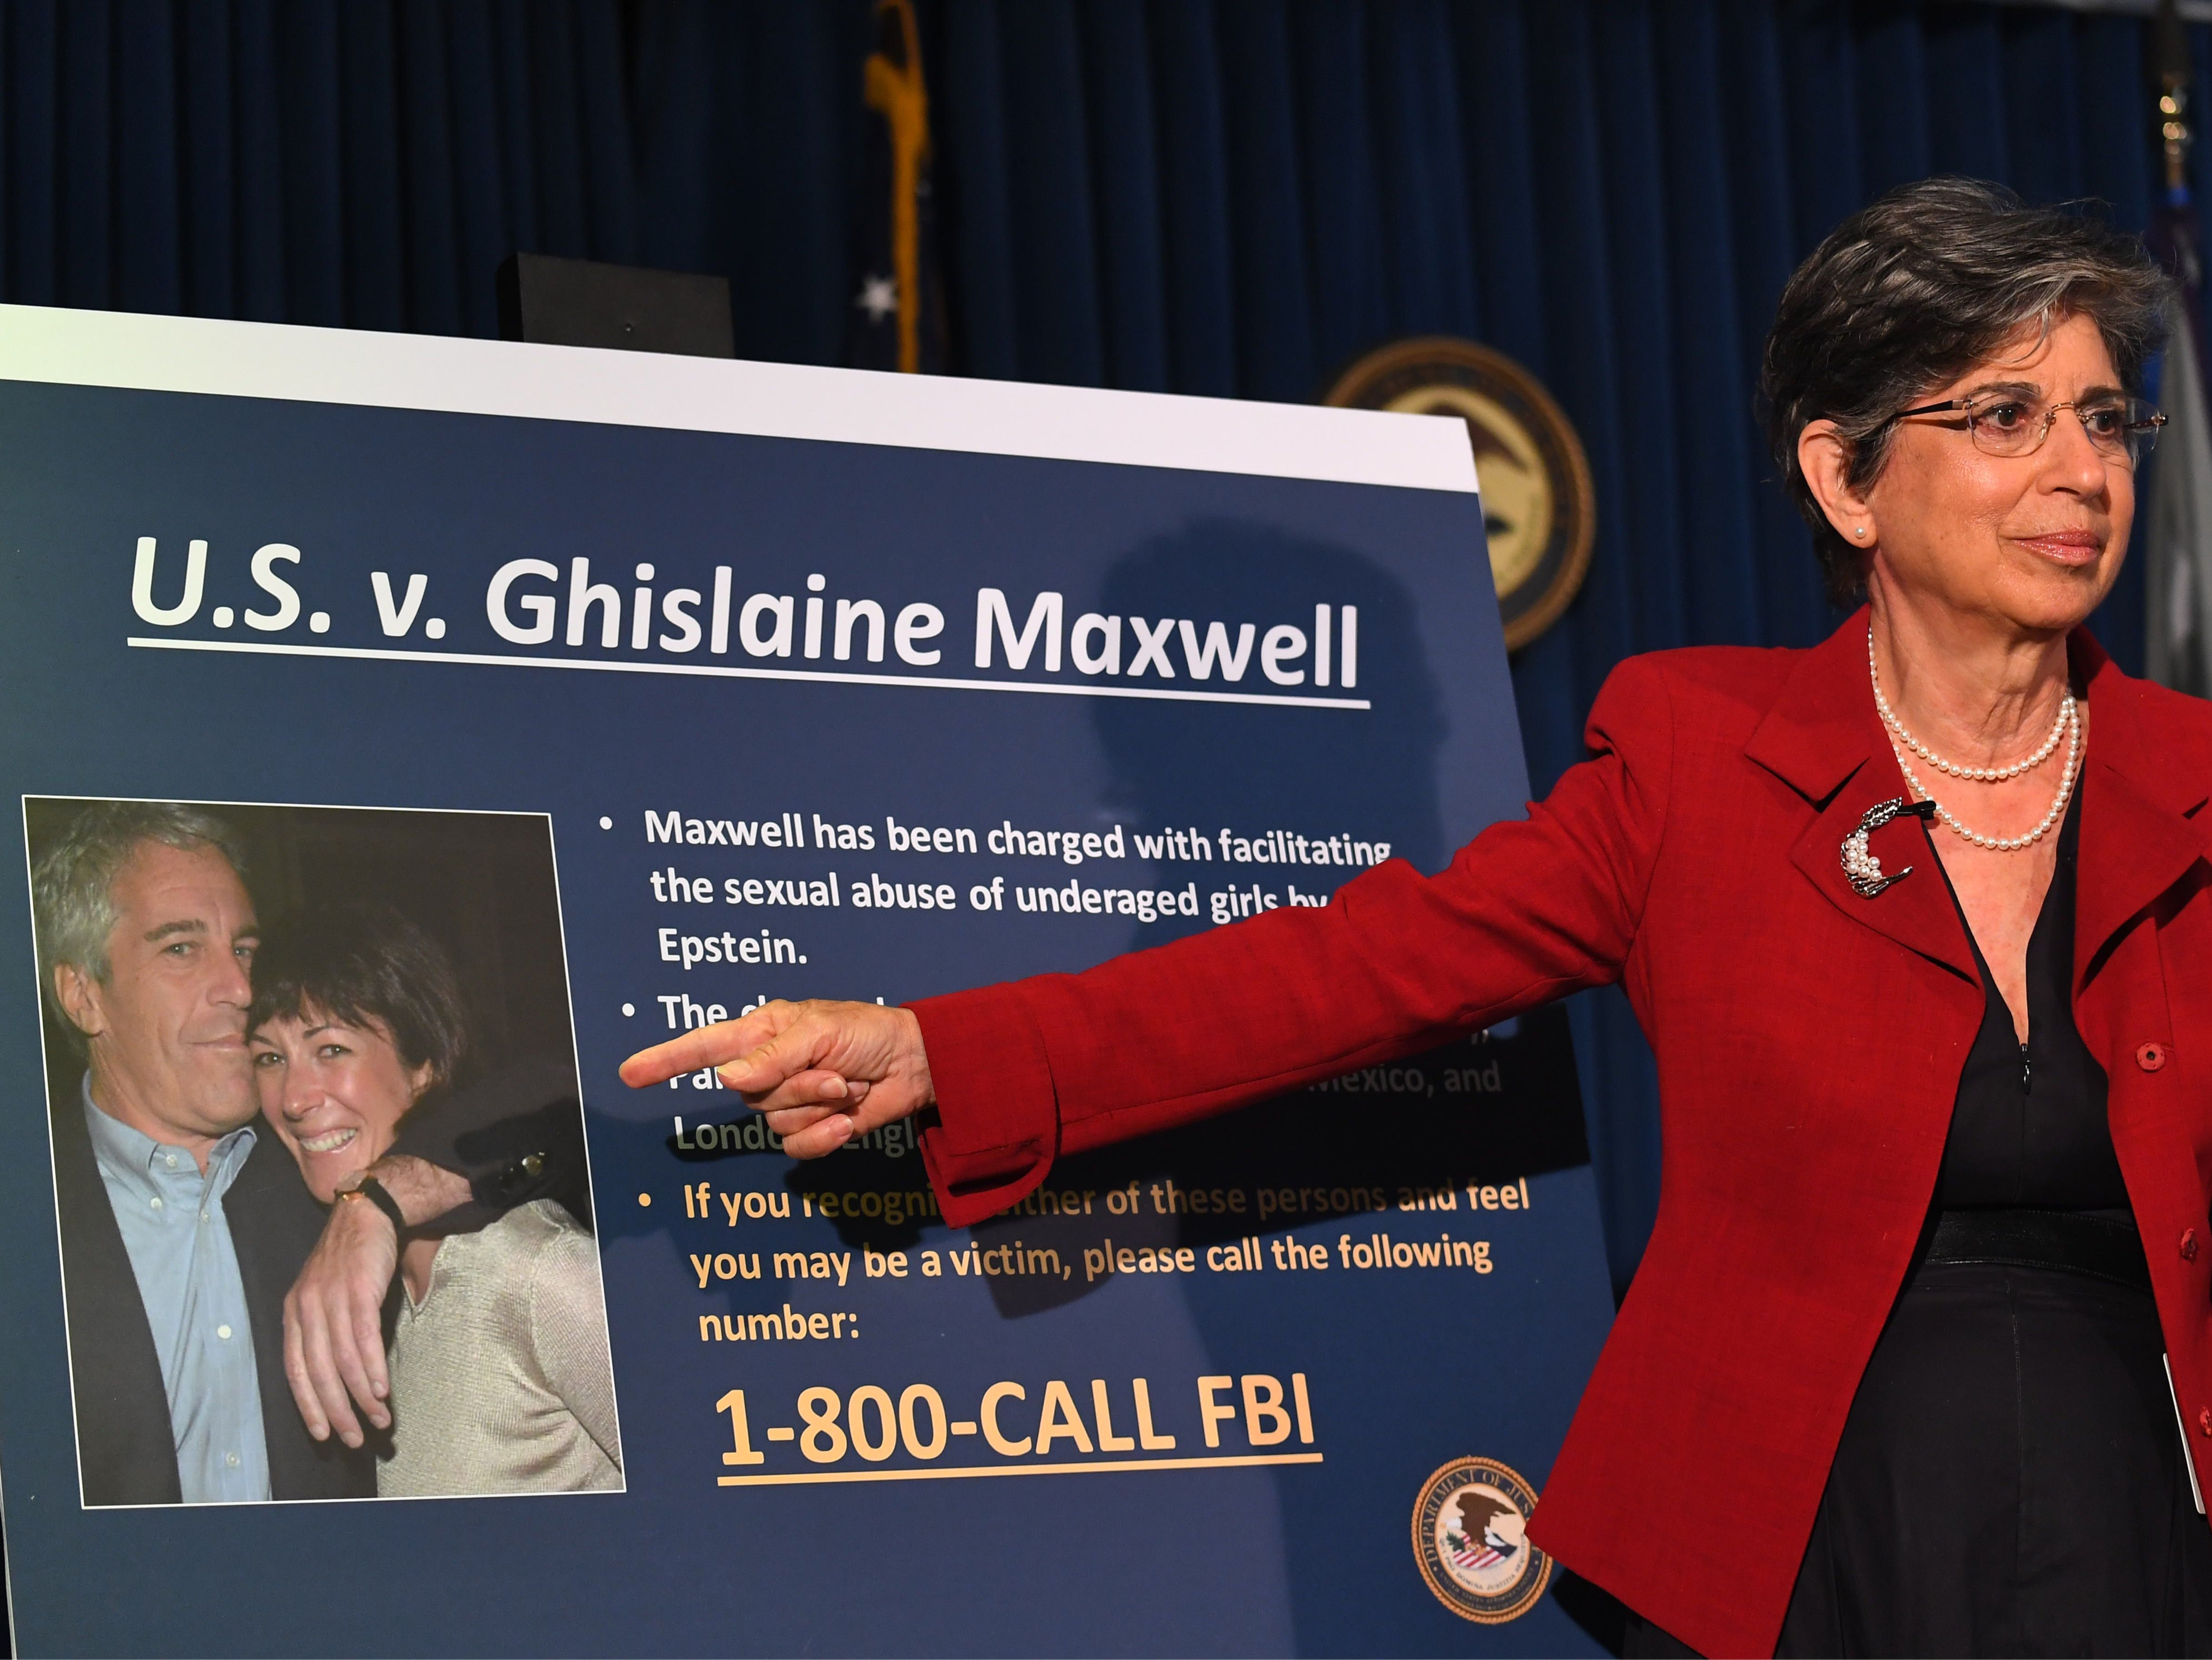 Acting US Attorney for the Southern District of New York Audrey Strauss announces charges against Ghislaine Maxwell during a press conference in New York City on 2 July 2020